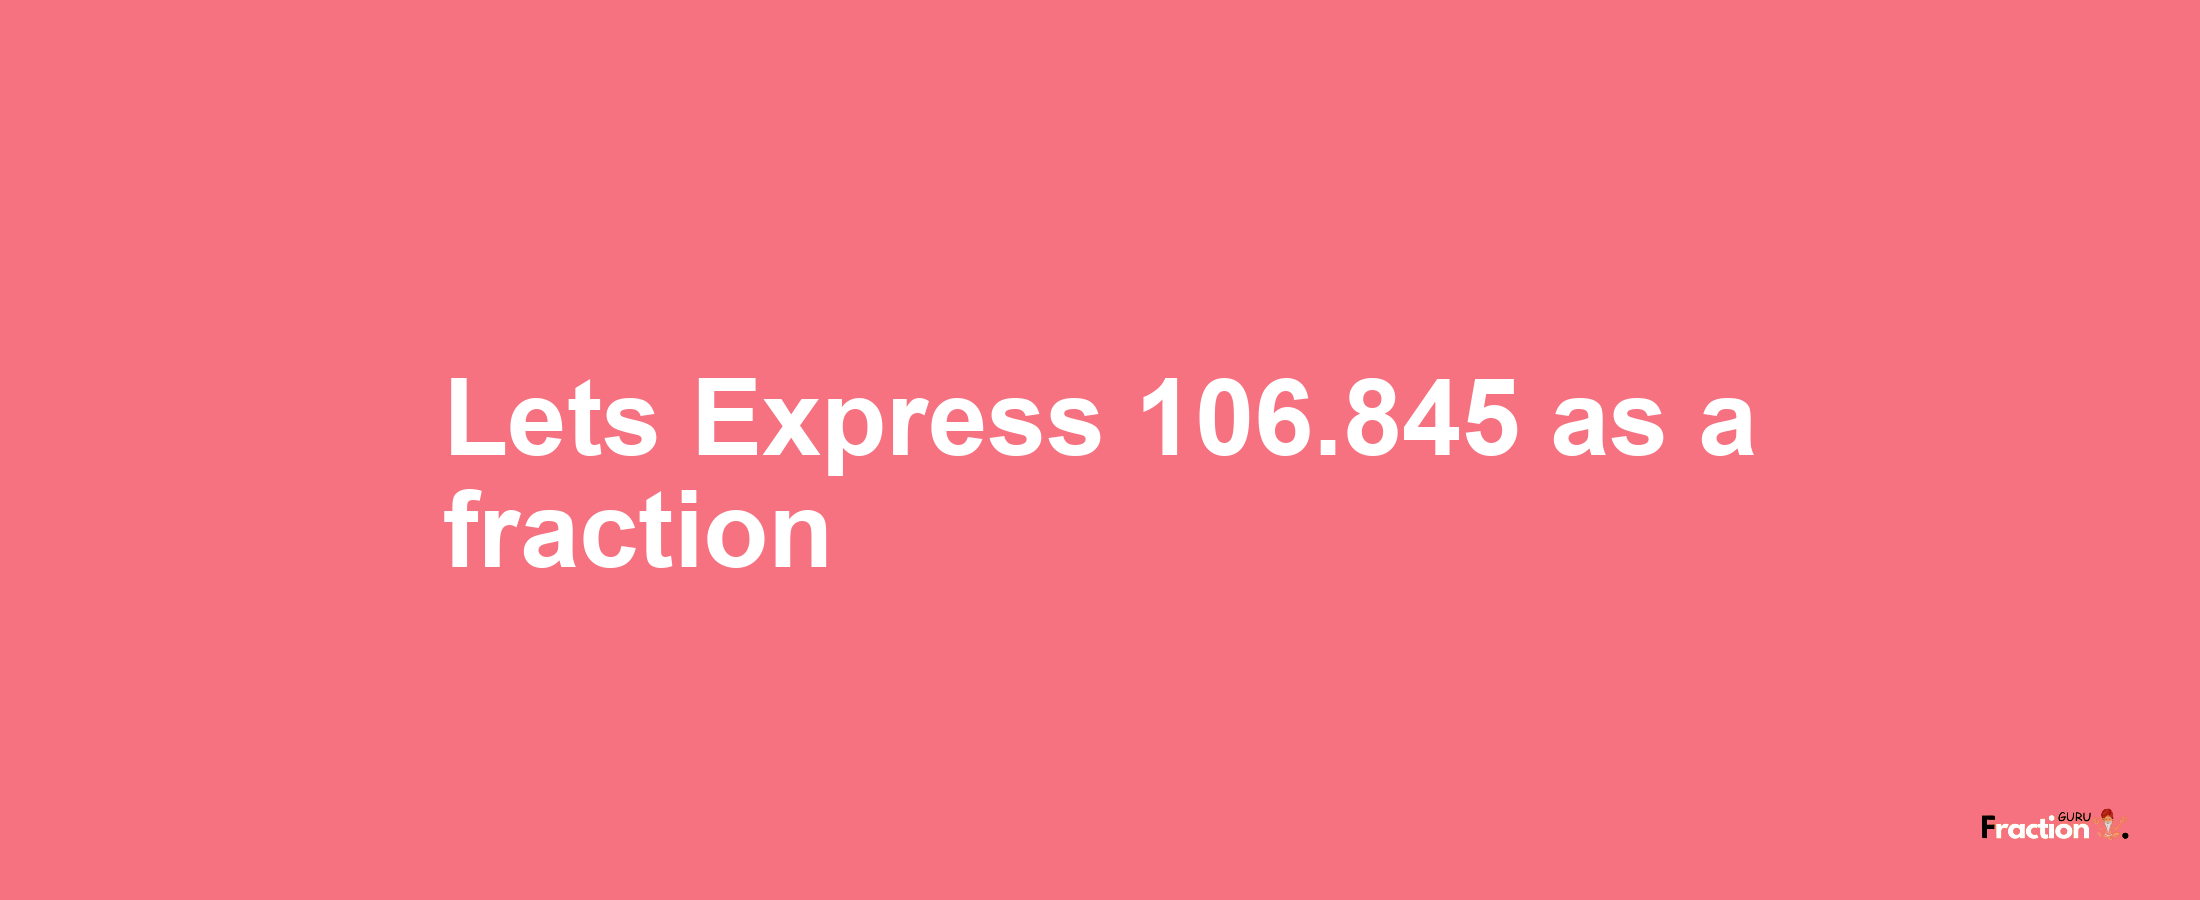 Lets Express 106.845 as afraction